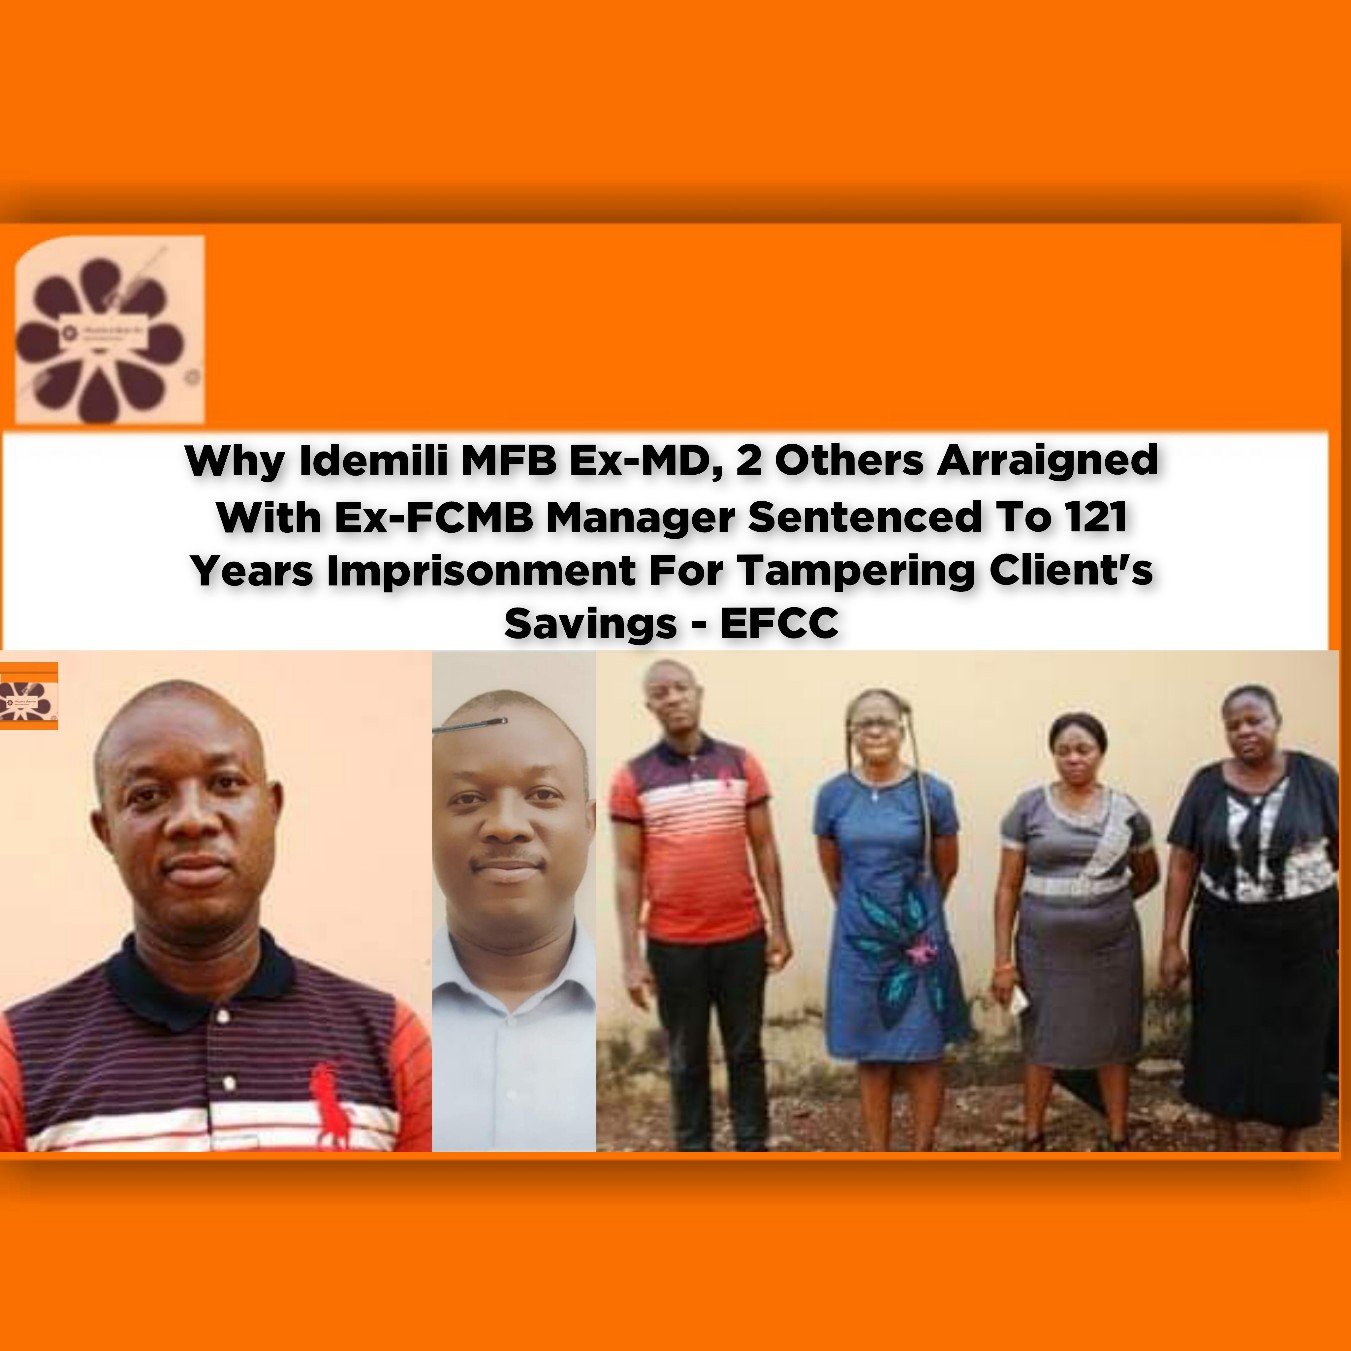 Why Idemili MFB Ex-MD, 2 Others Arraigned With Ex-FCMB Manager Sentenced To 121 Years Imprisonment For Tampering Client's Savings - EFCC ~ OsazuwaAkonedo #Redesign